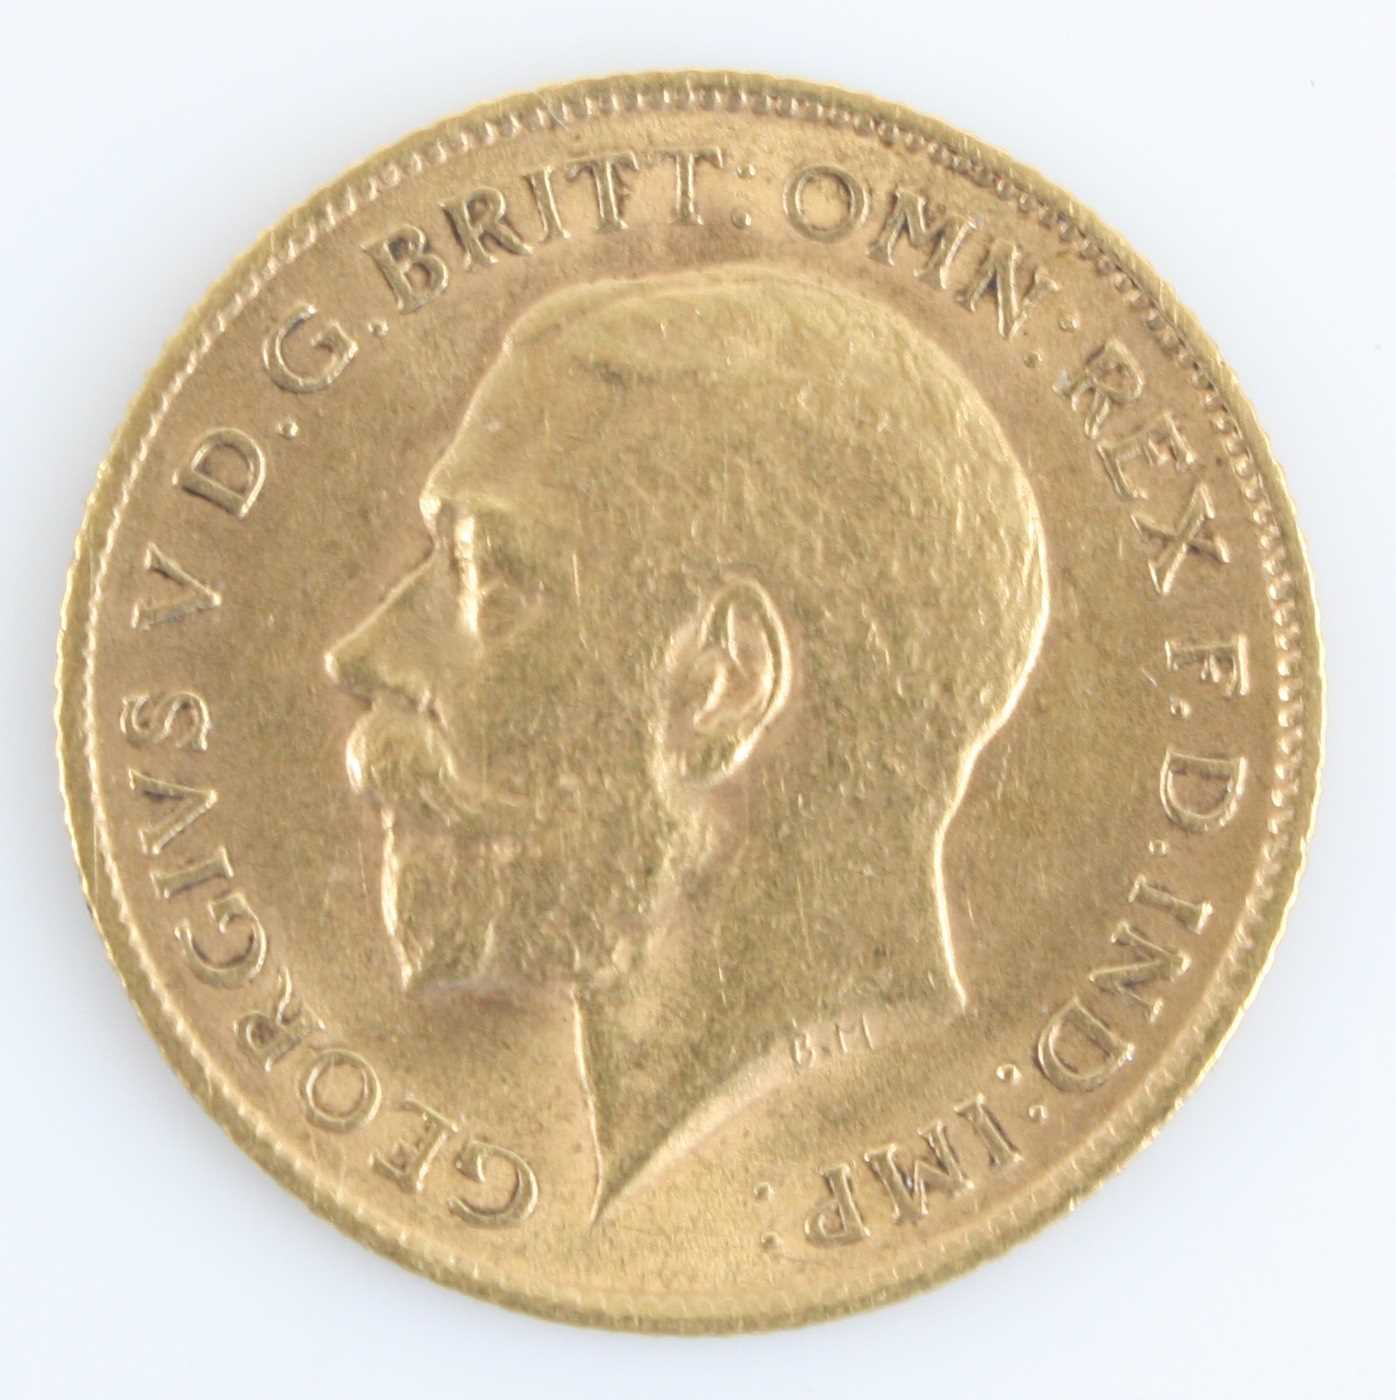 Great Britain, 1911 gold half sovereign, George V, rev: St George and Dragon above date. (1)